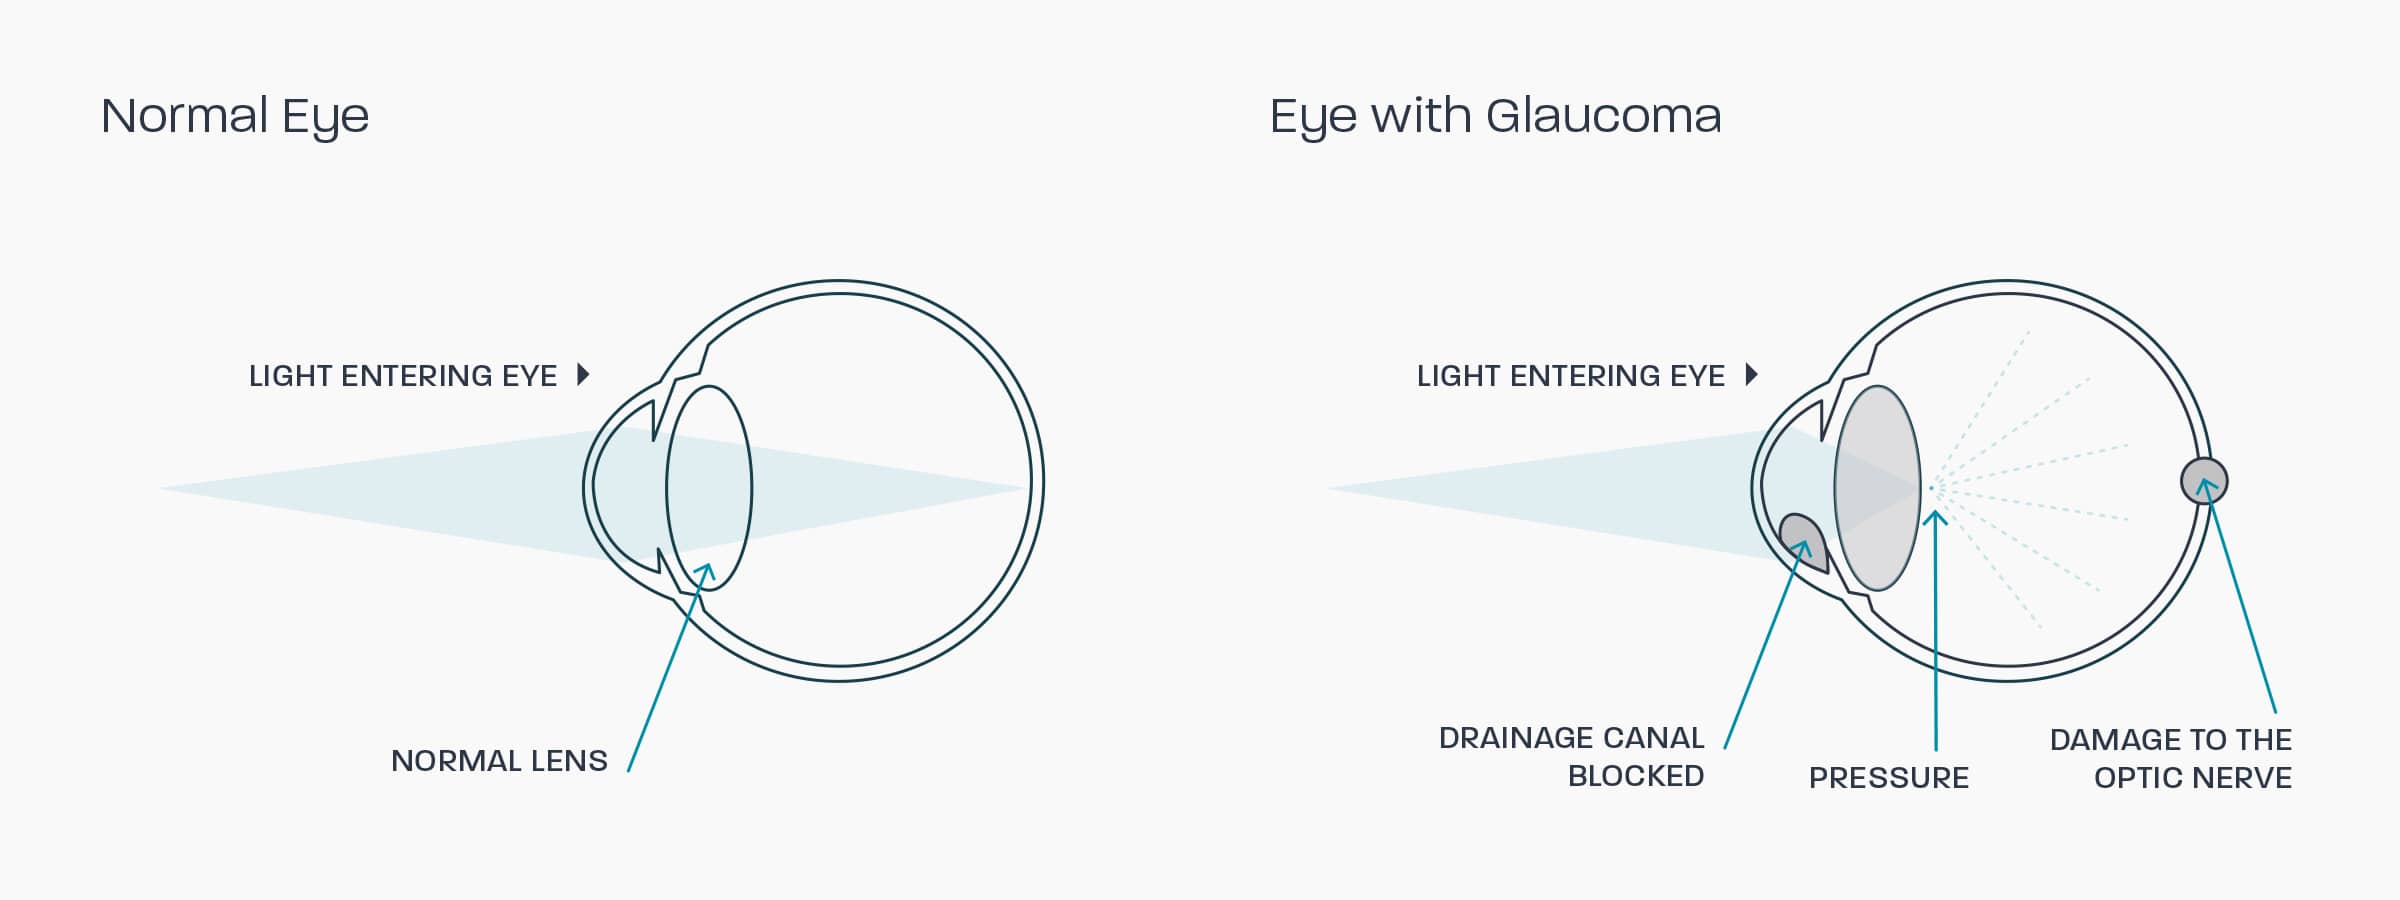 A graphic showing how glaucoma affects the eye